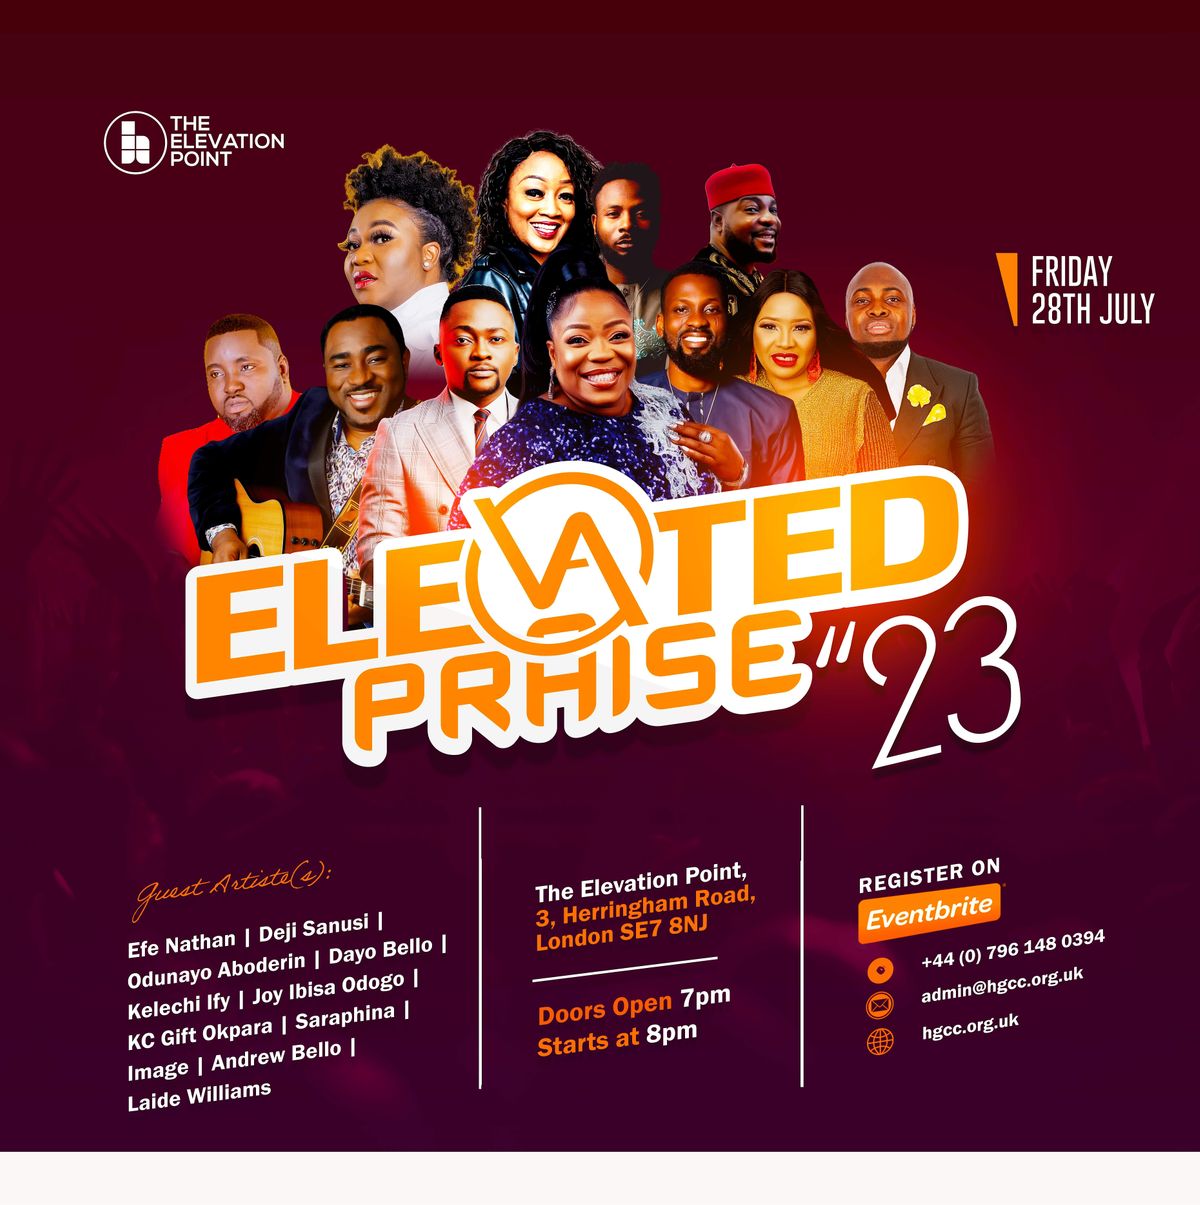 Elevated Praise 2023, HGCC The Elevation Point, London, 28 July 2023